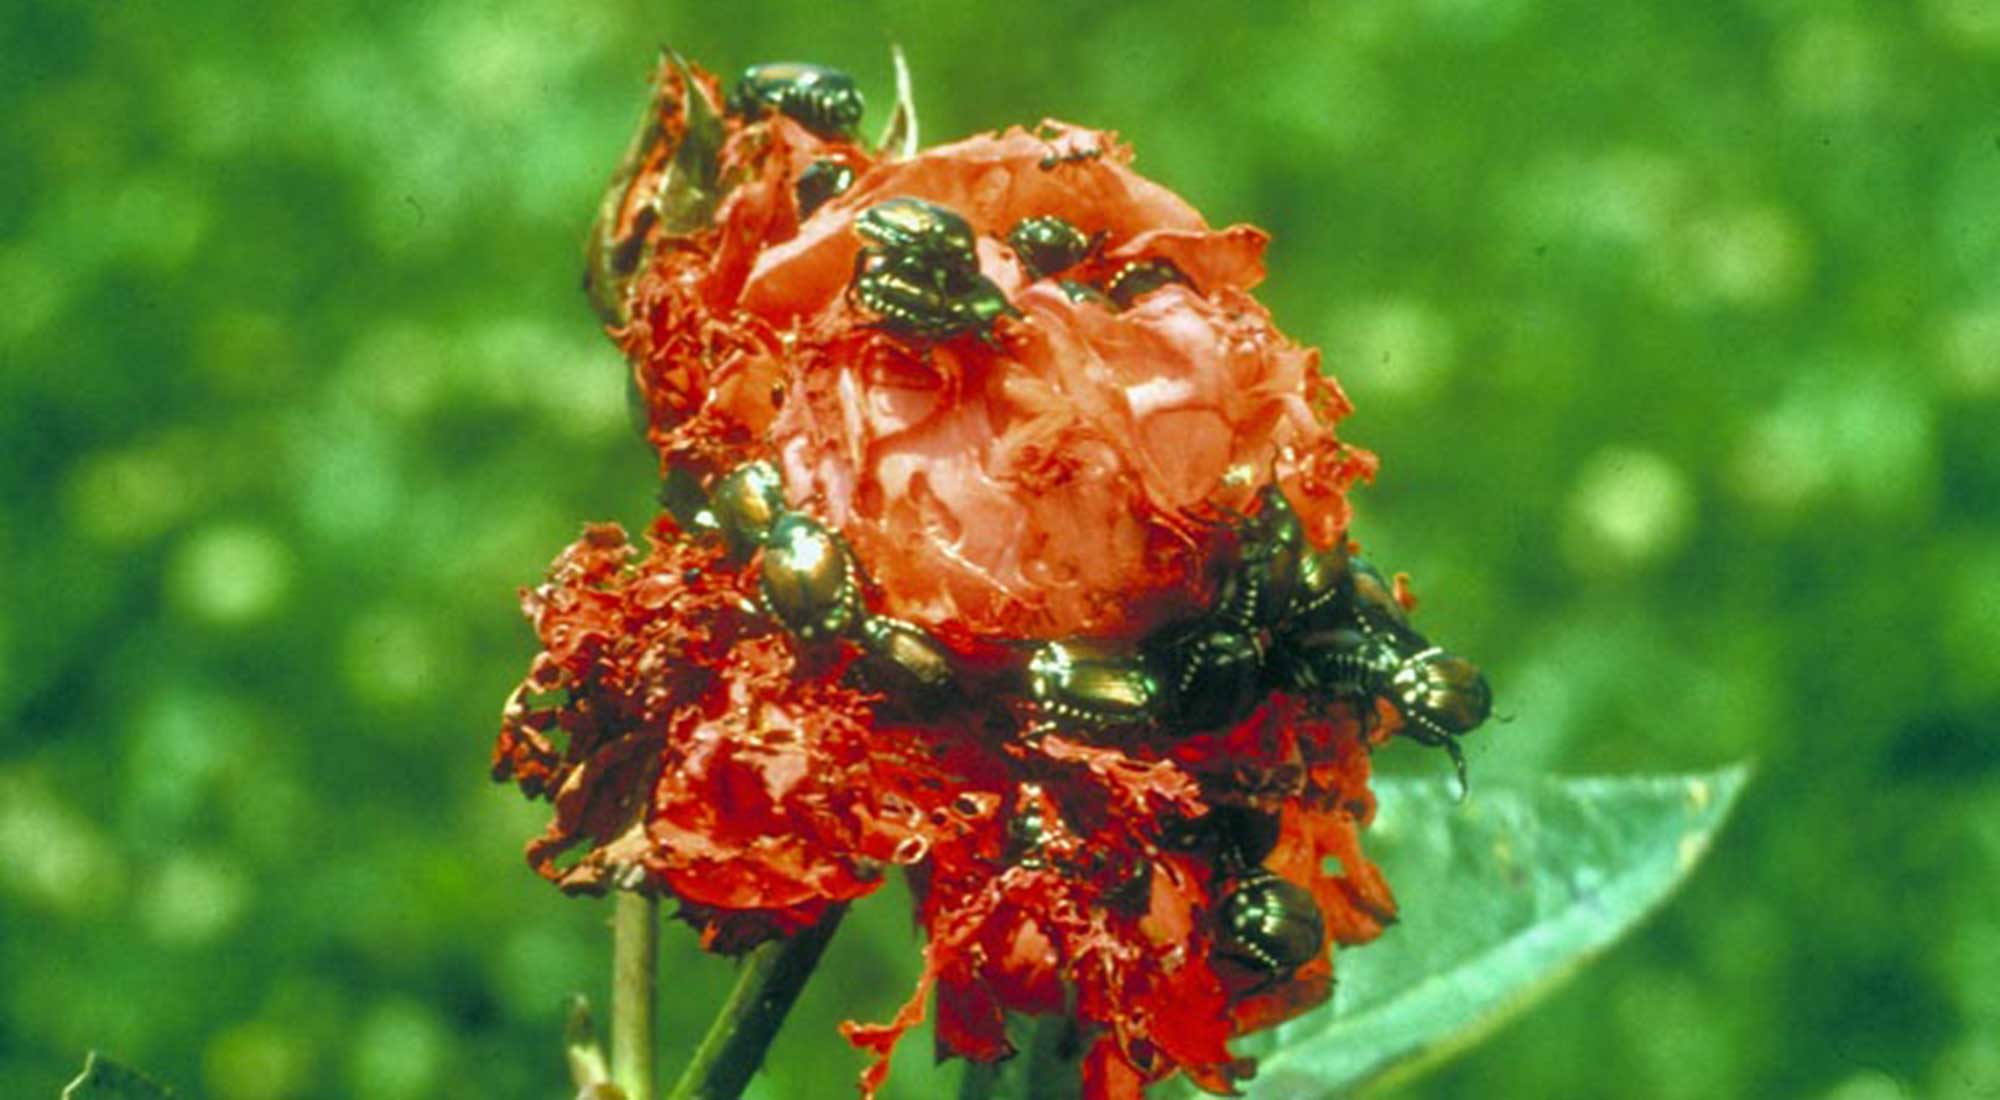 Shiny green and bronze beetles feeding on a red rose flower.